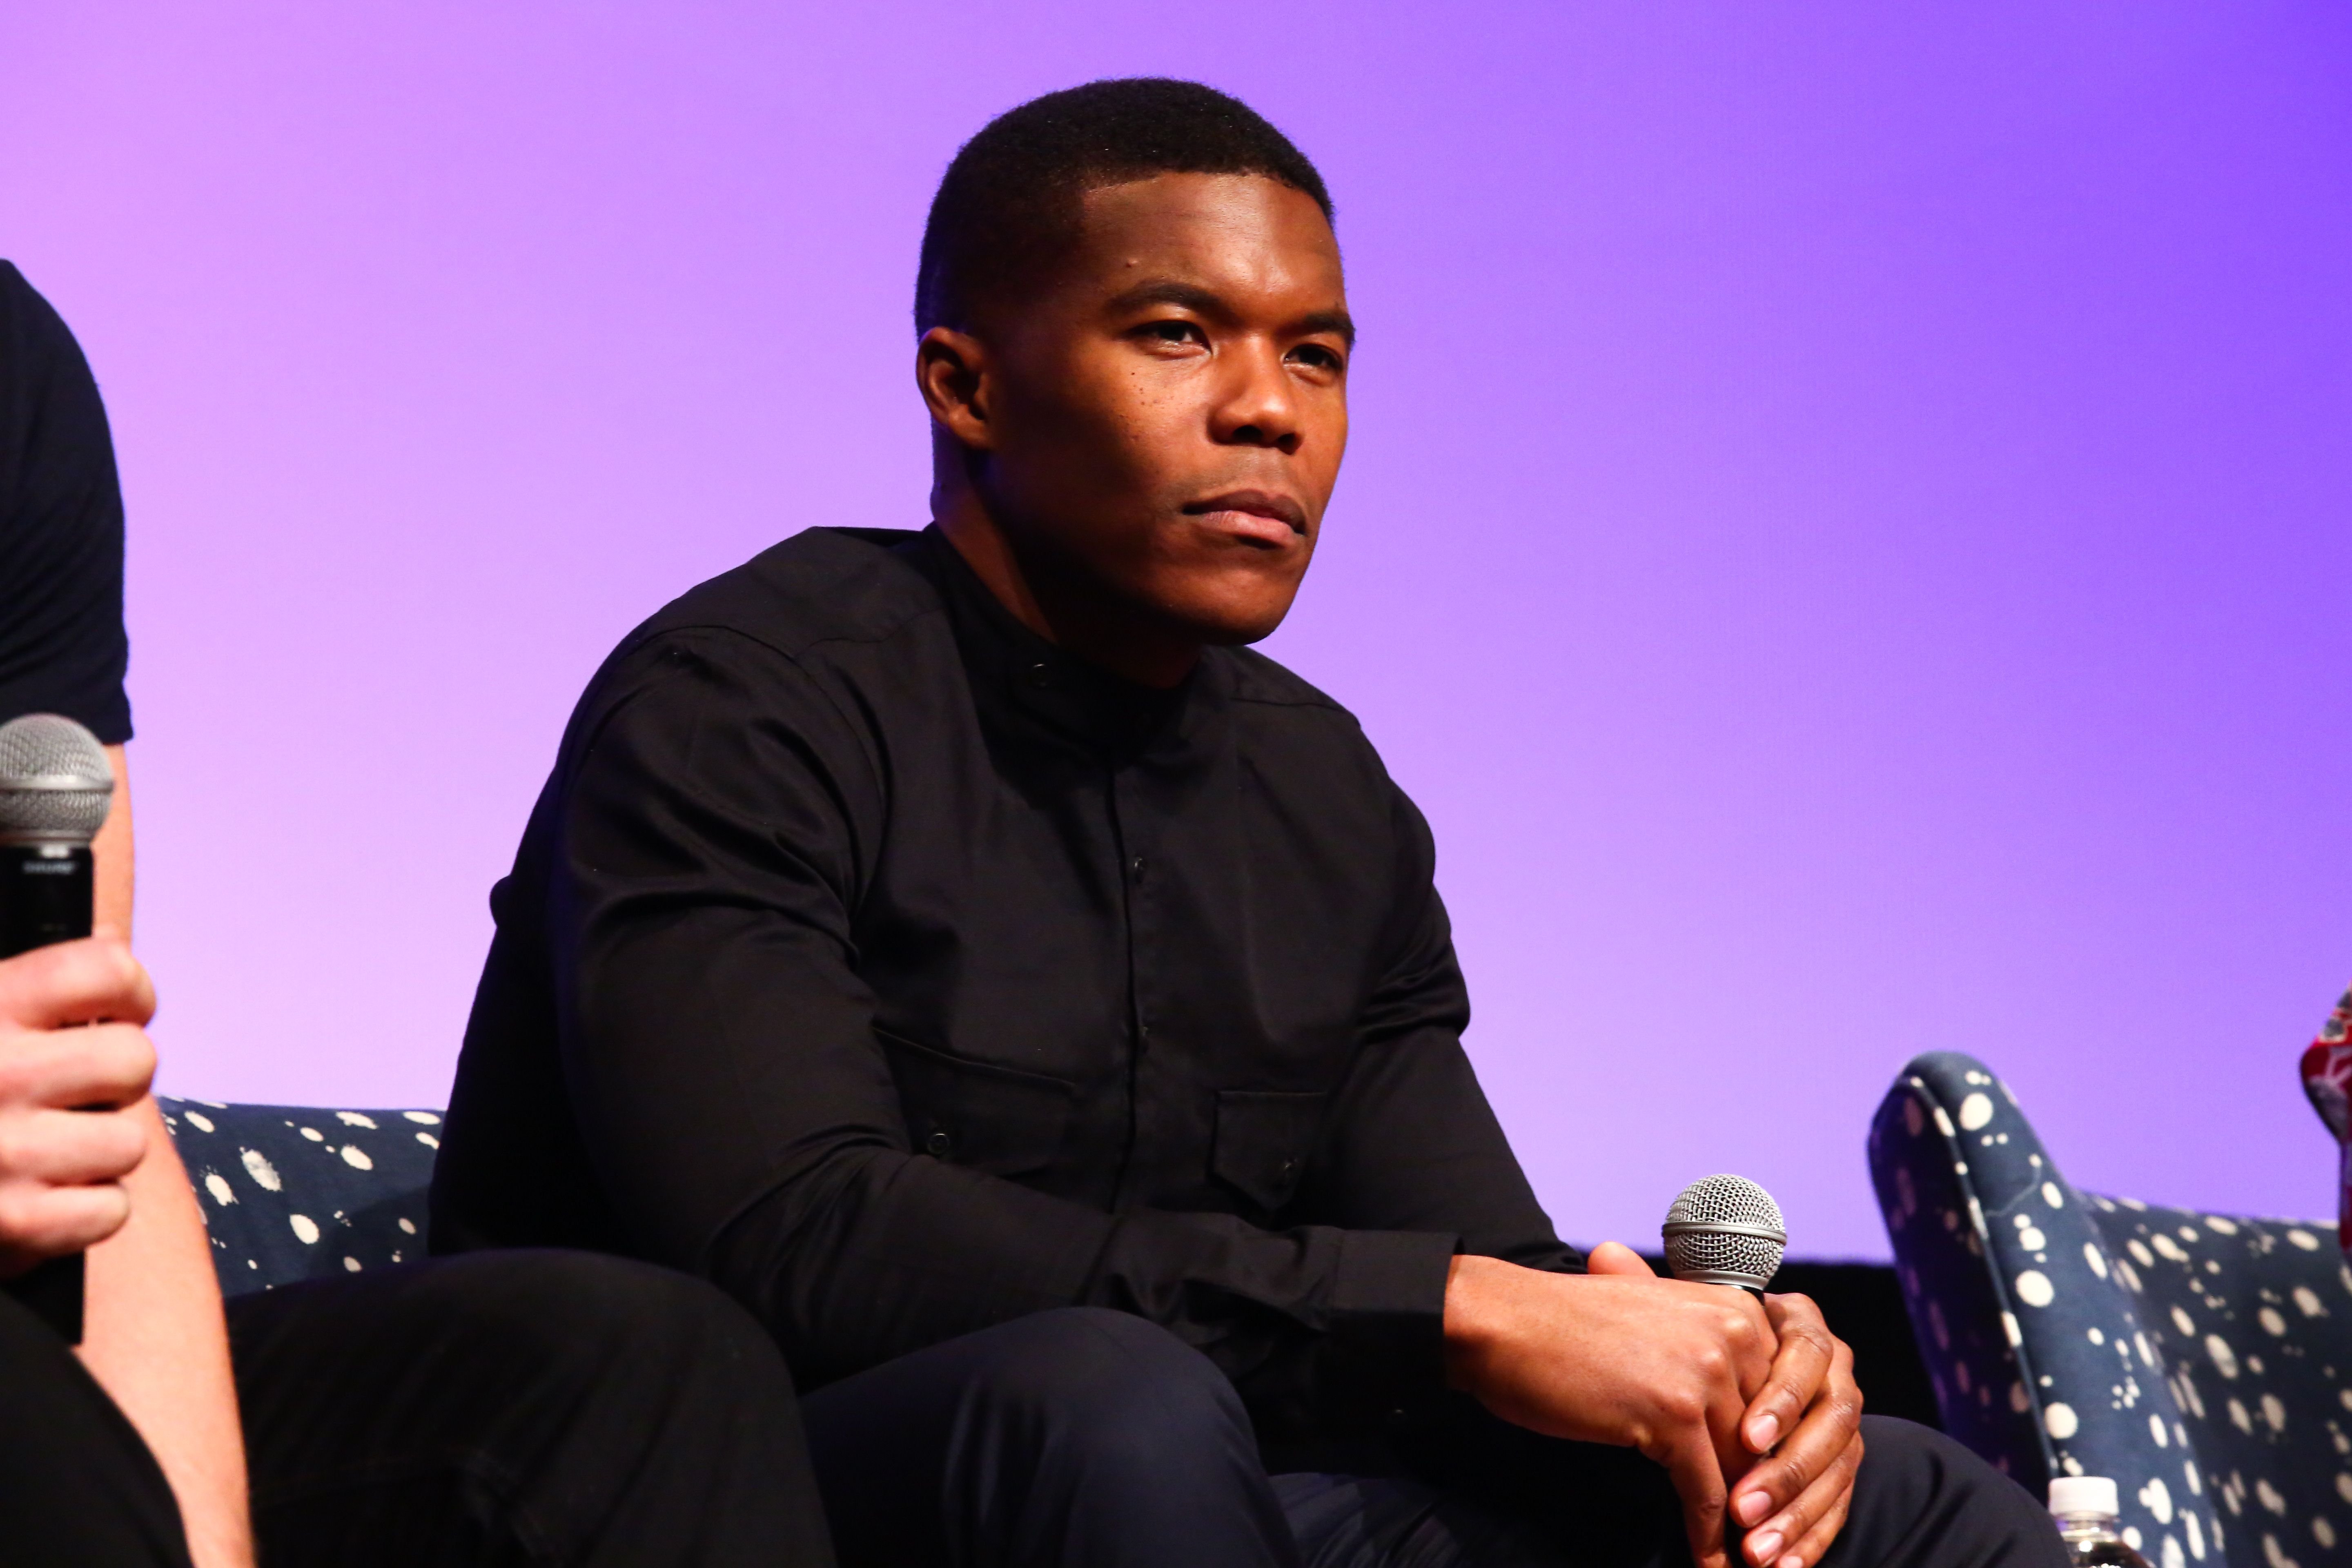 Gaius Charles attends a Q&A for 'Taken' on Day Three of the aTVfest 2017 at SCADshow on February 4, 2017 in Atlanta, Georgia. | Photo: Getty Images